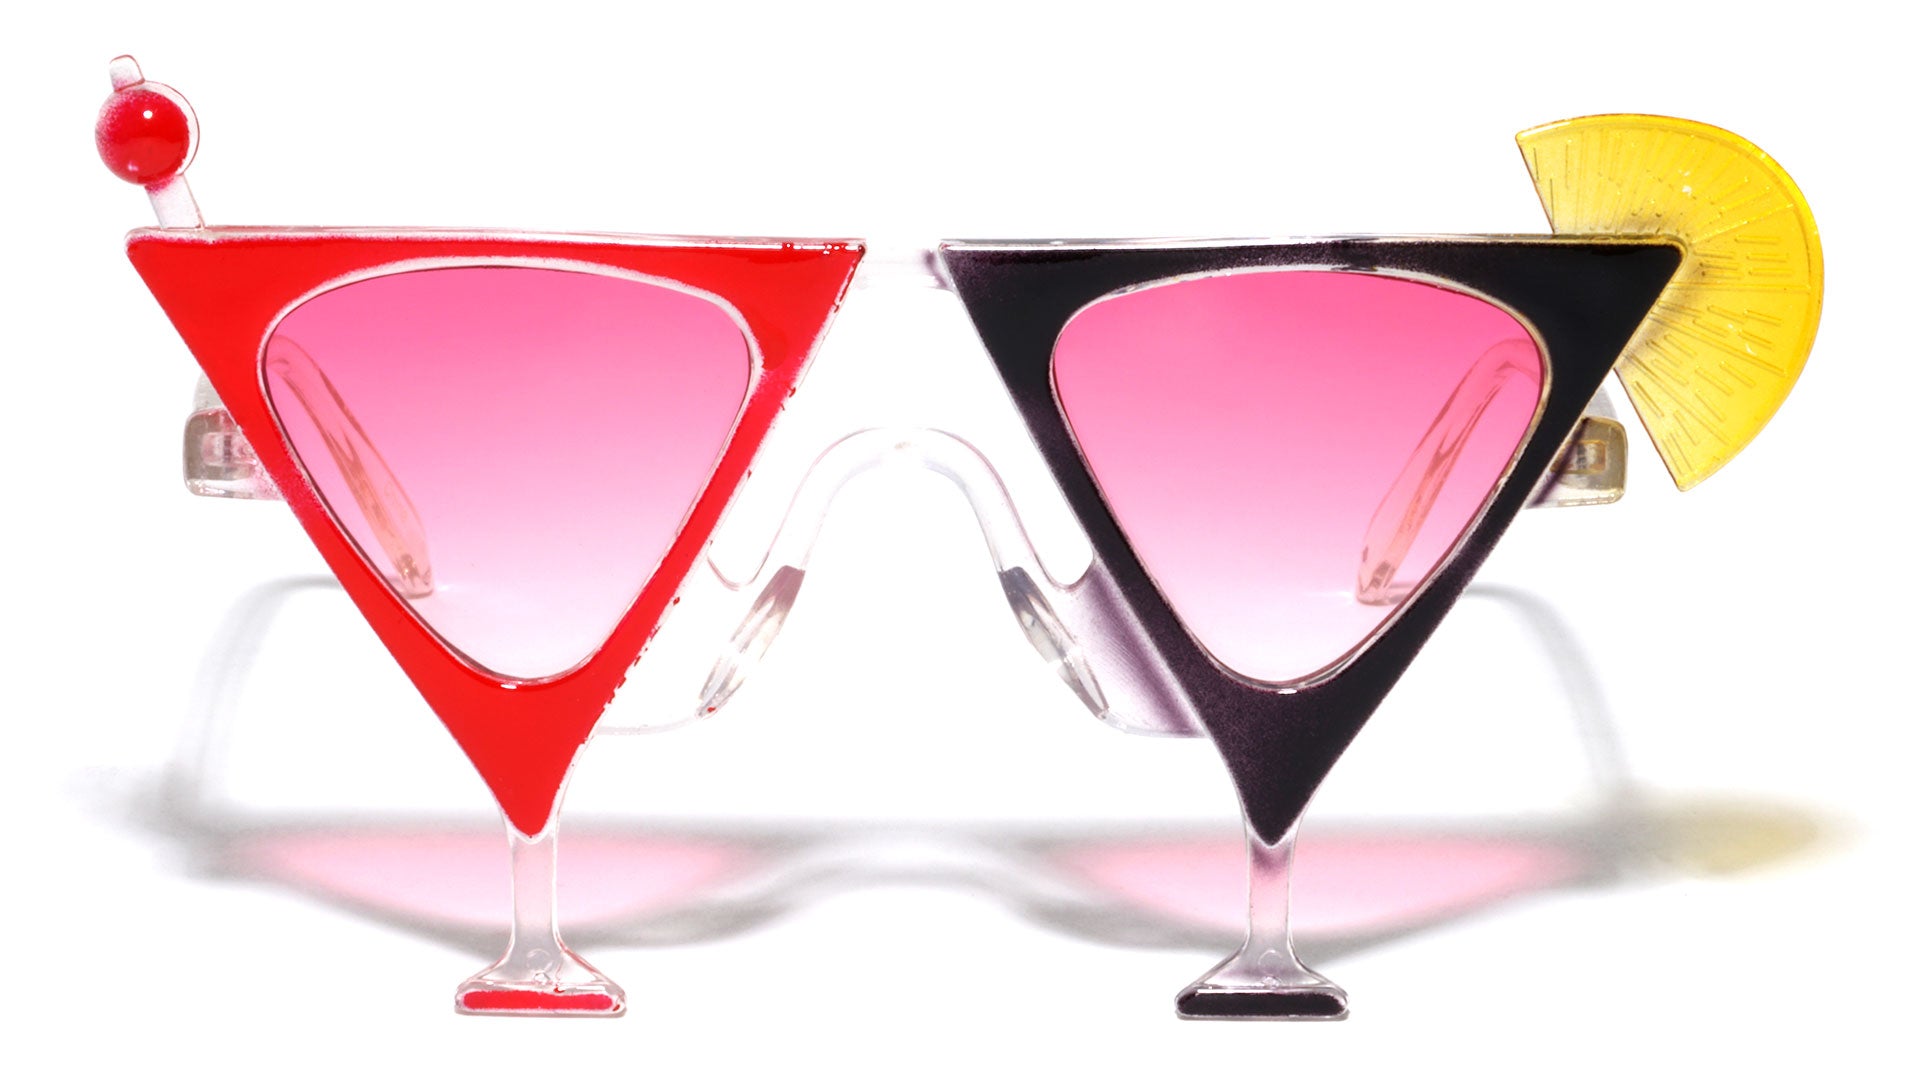 Cocktail Pink Drink Party Glasses Wholesale - Frontier Fashion, Inc.